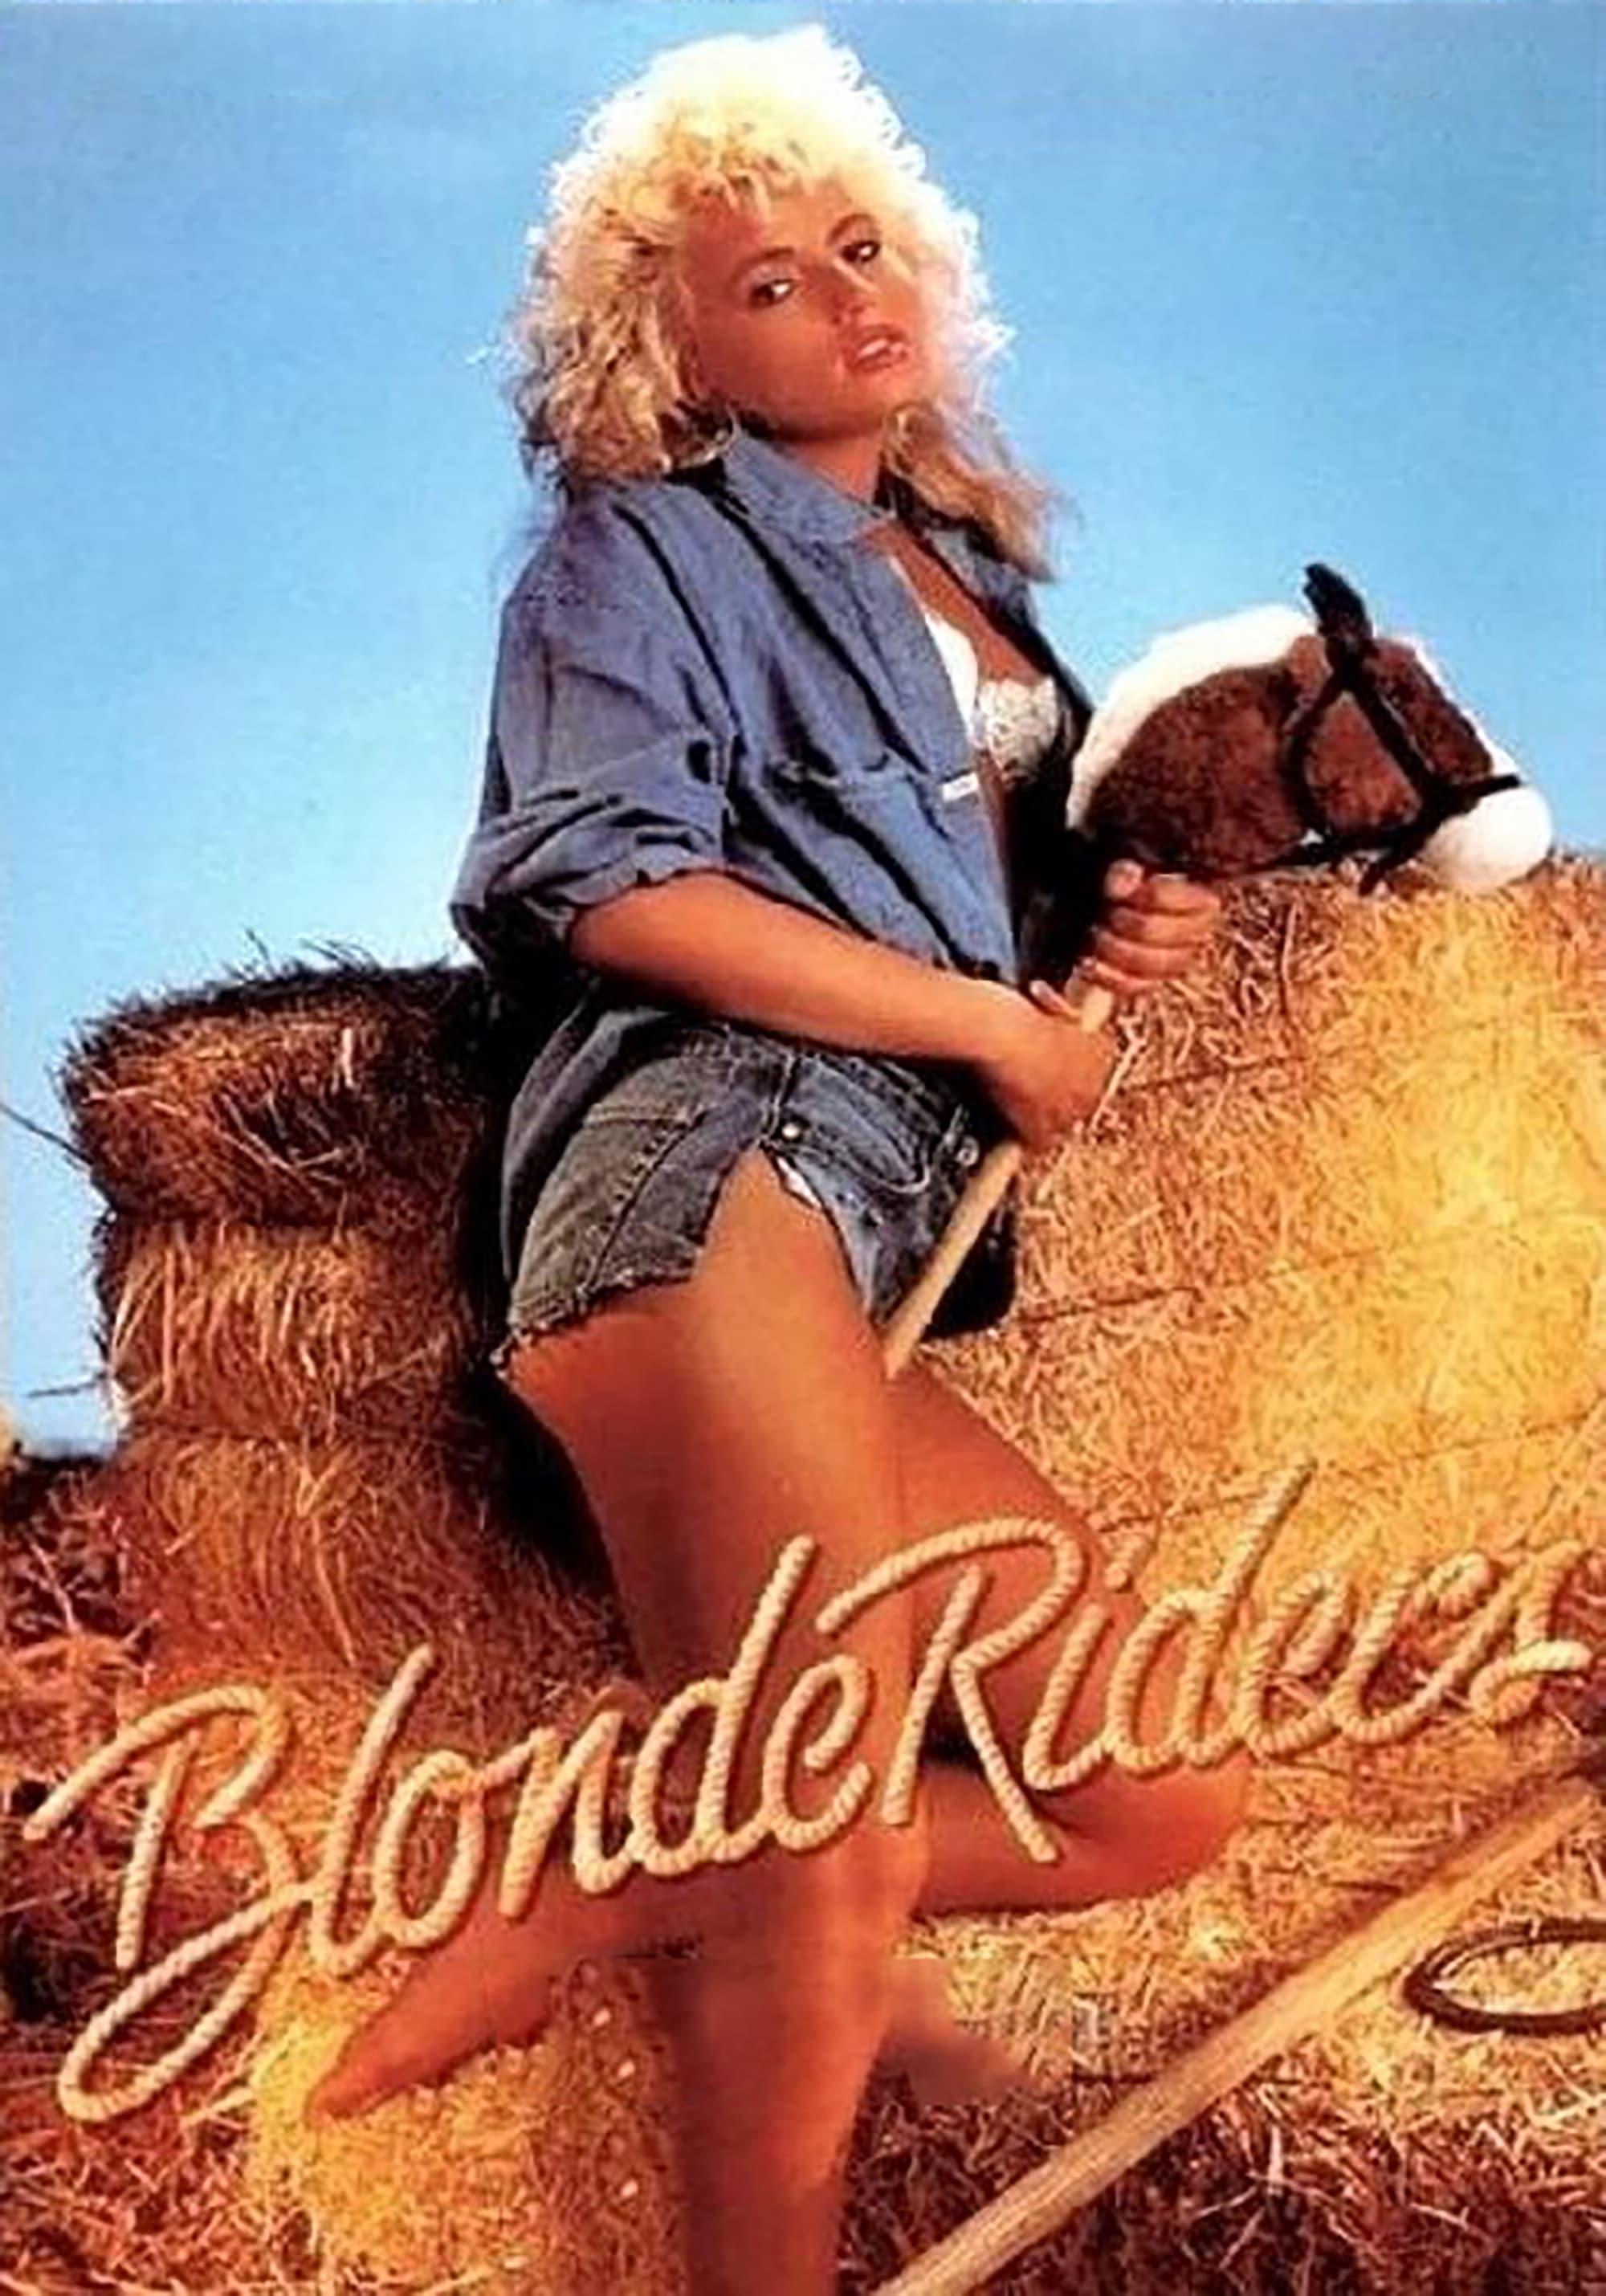 Blond Riders poster